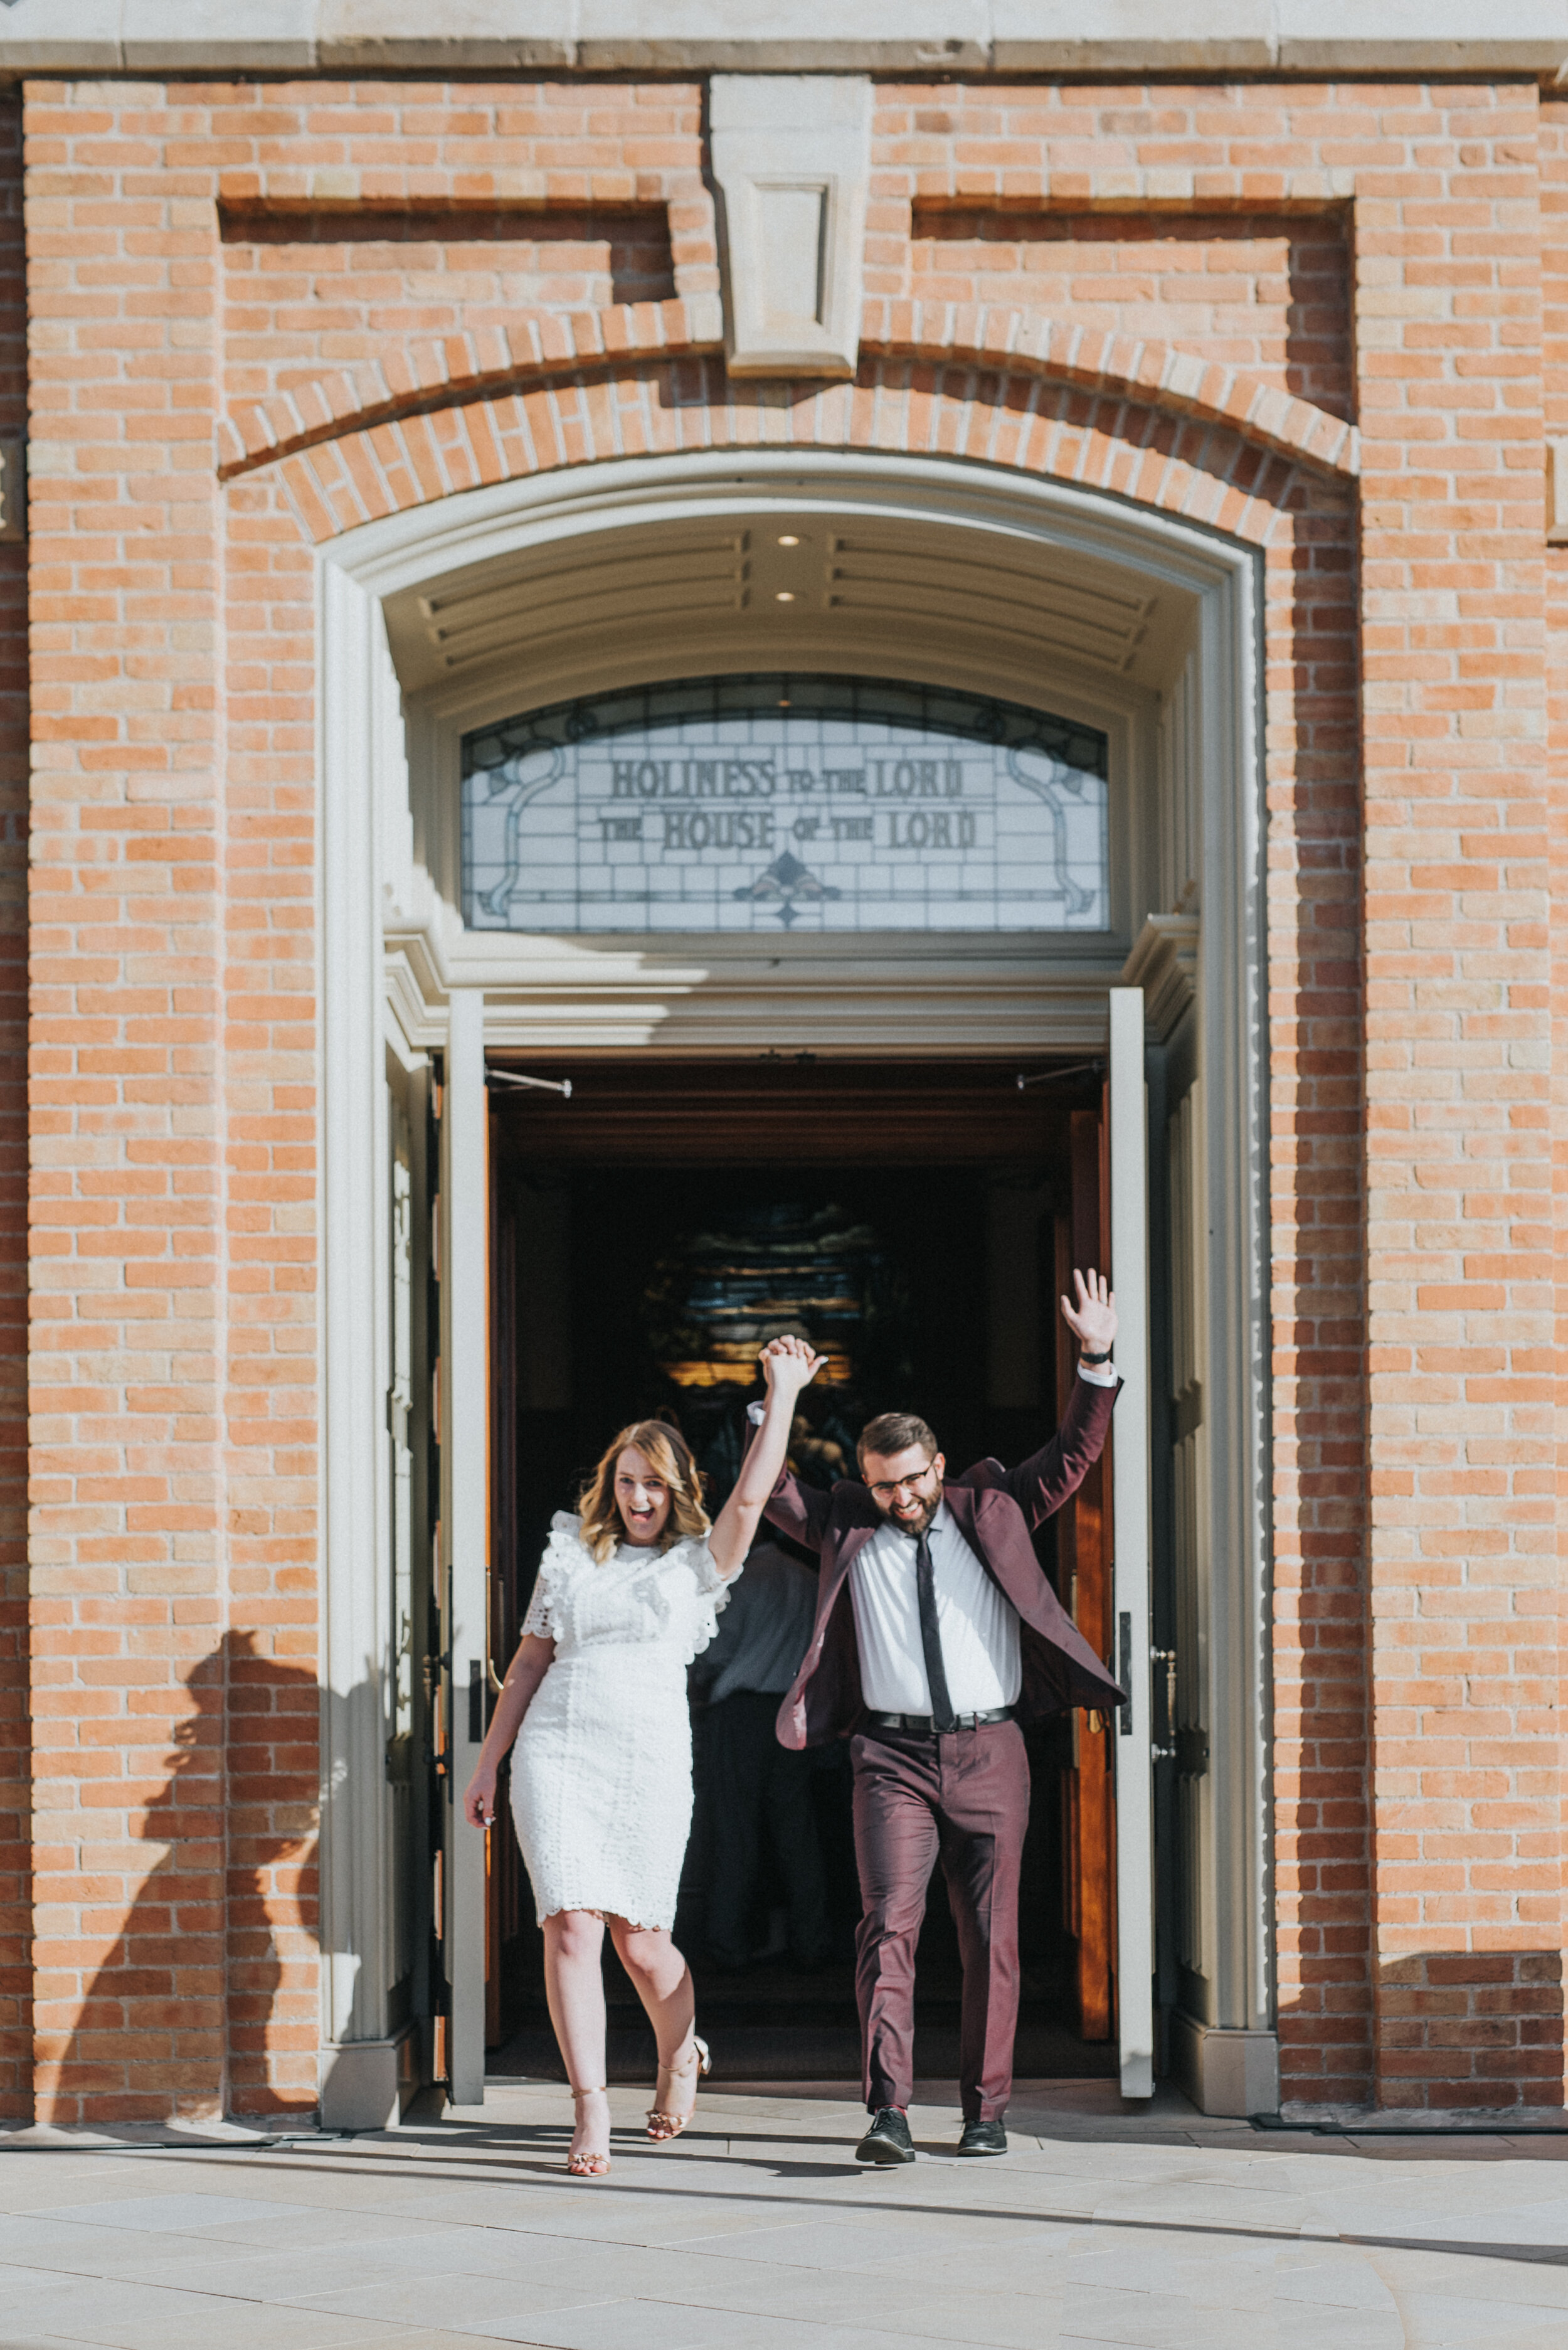  provo city center temple exit celebration hands in the air smiling happy burgundy grooms suit knee length lace wedding dress professional wedding photographer utah valley provo utah holding hands just married #utahvalleyweddingphotographer #provophotographer #provoutah #provocitycentertemple #lds #weddinginspo #ido #shesaidyes #utah #professionalweddingphotographer  